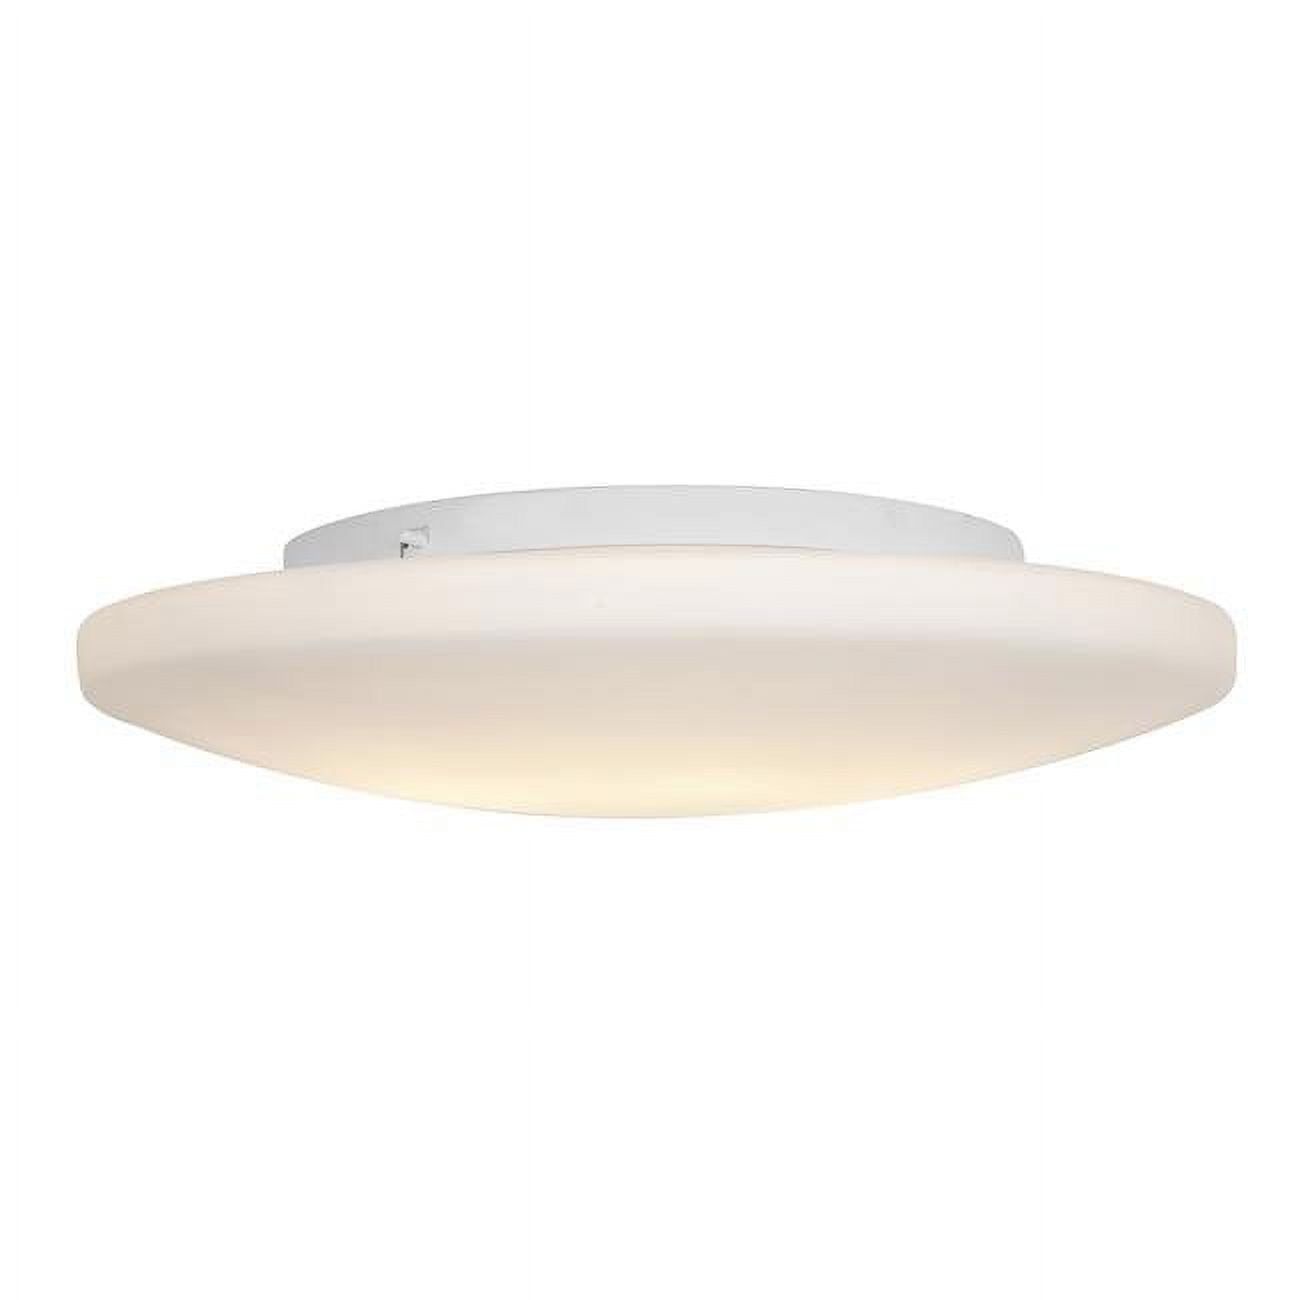 Picture of Access Lighting 50162-WH-OPL Orion 3 Light White Flush Mount Ceiling Light in Incandescent, Opal